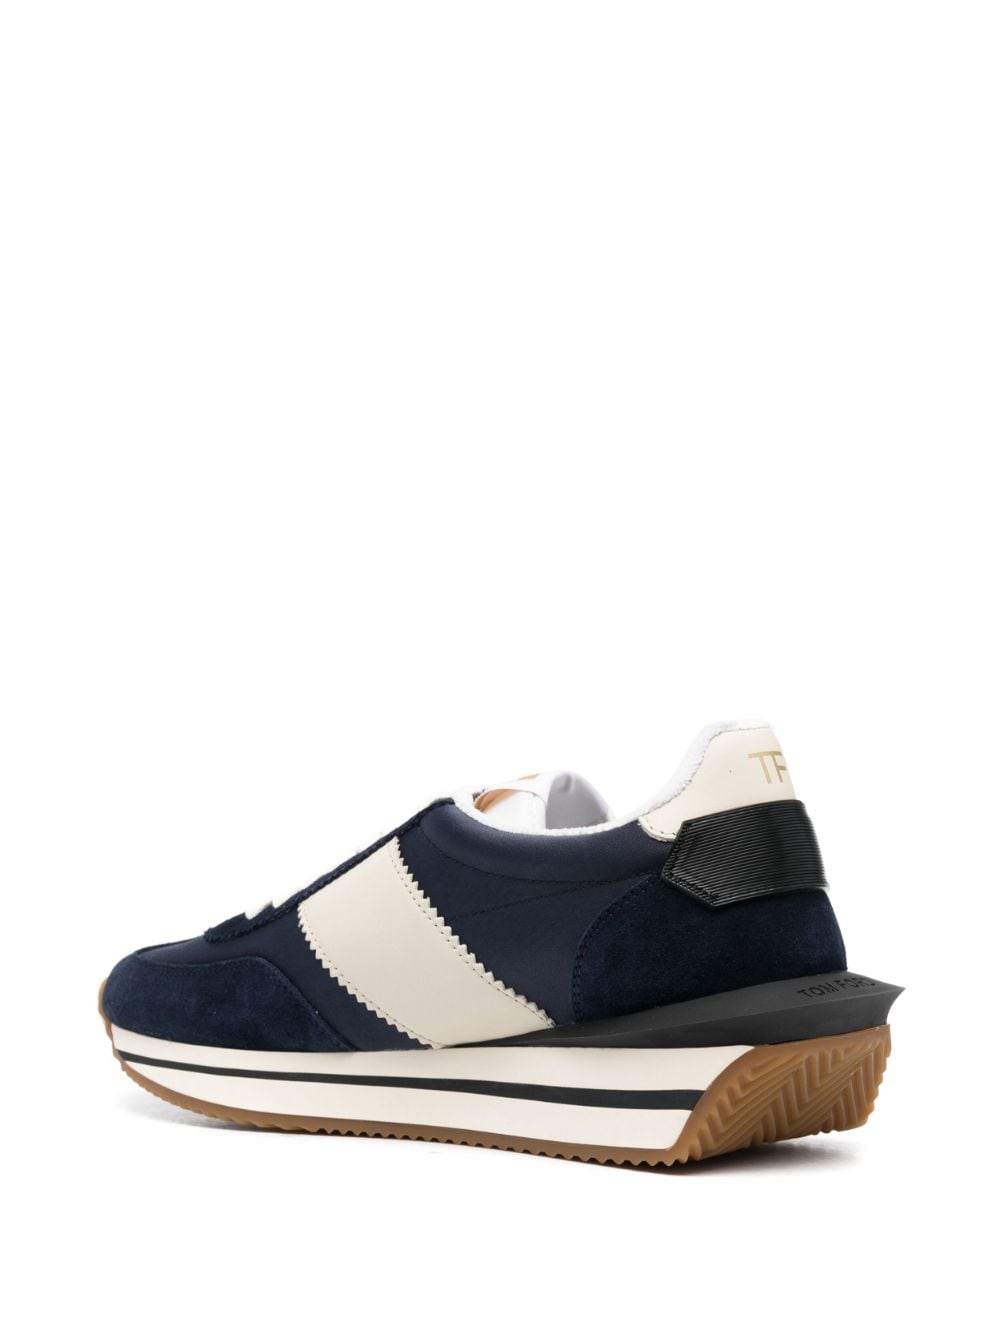 Tom Ford James Mixed Media Low Top Sneaker In Blue | ModeSens